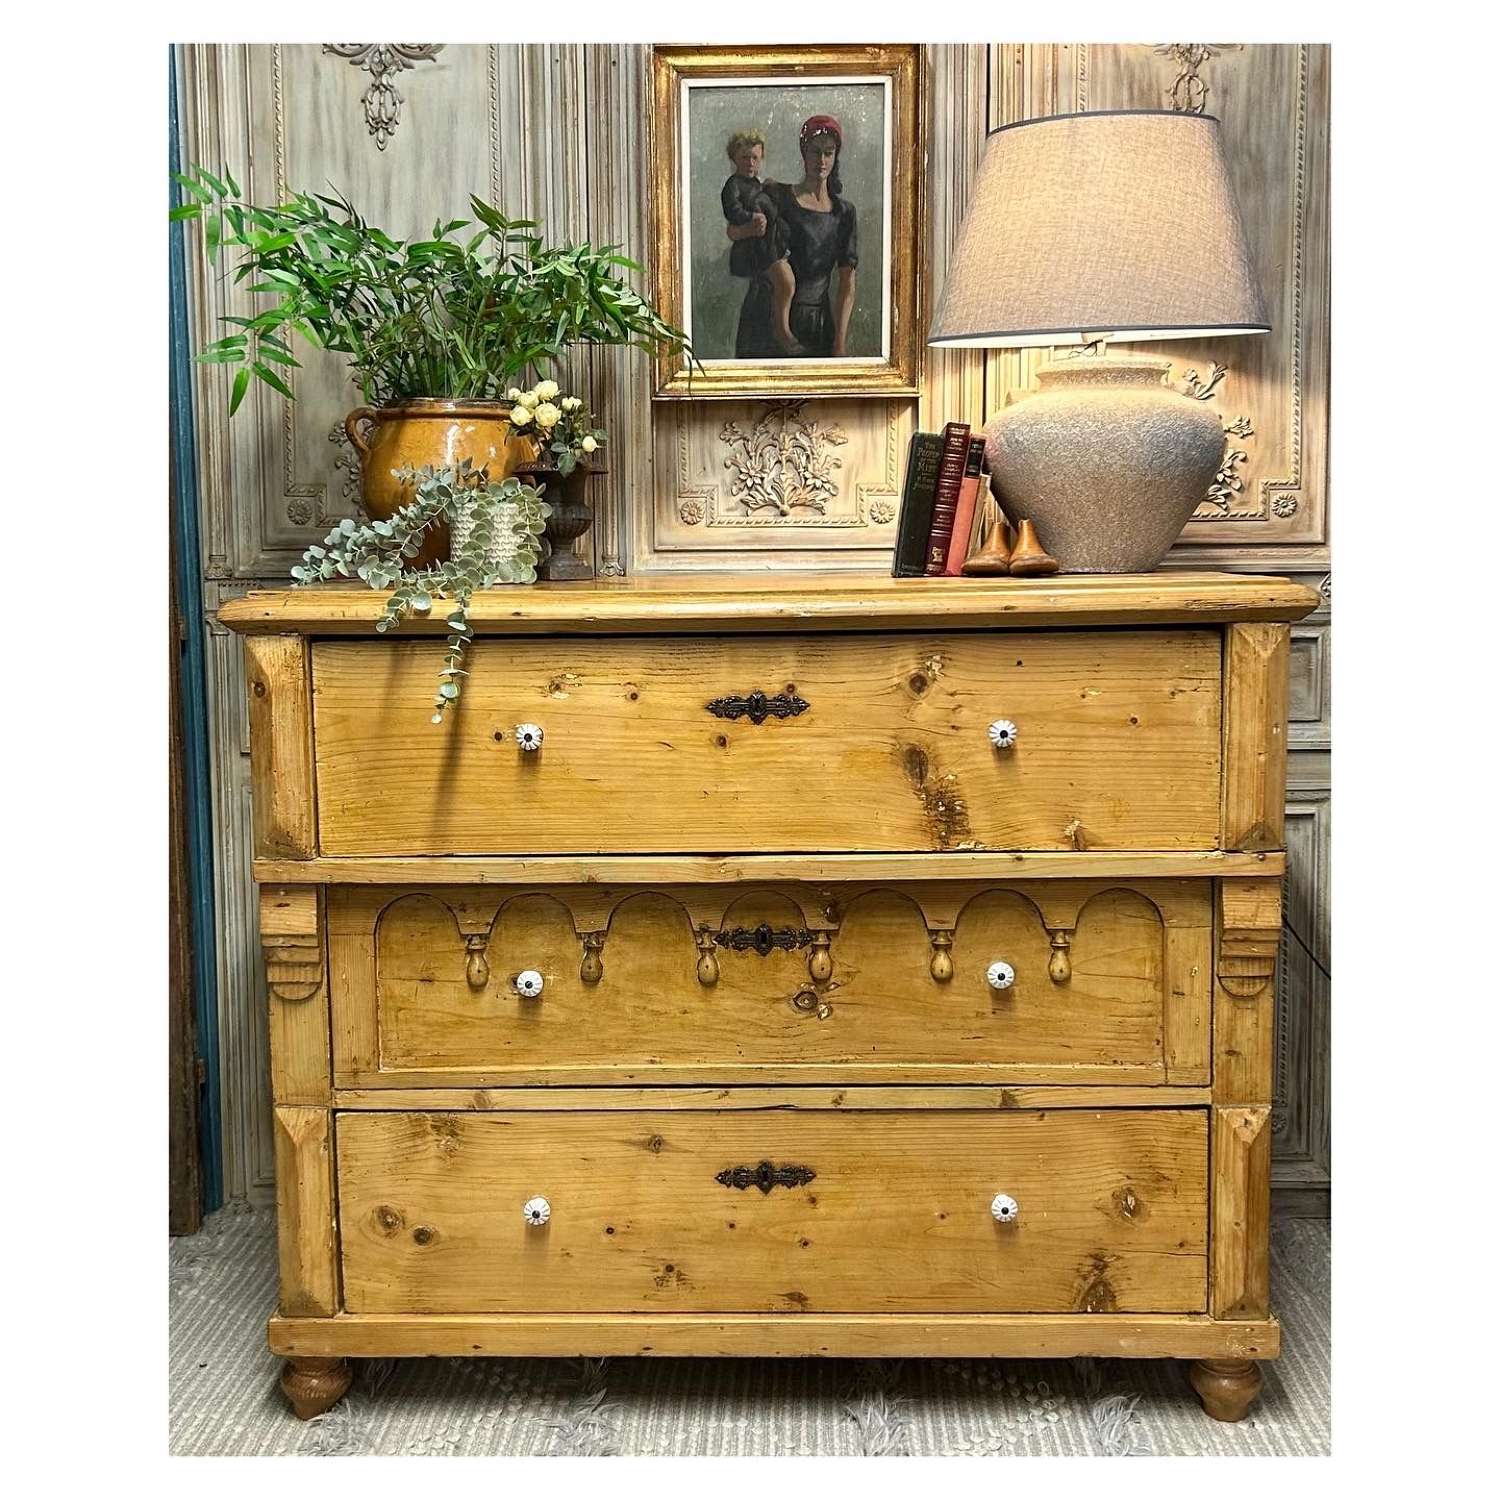 Antique Pine Rustic Hungarian Chest of Drawers c1900